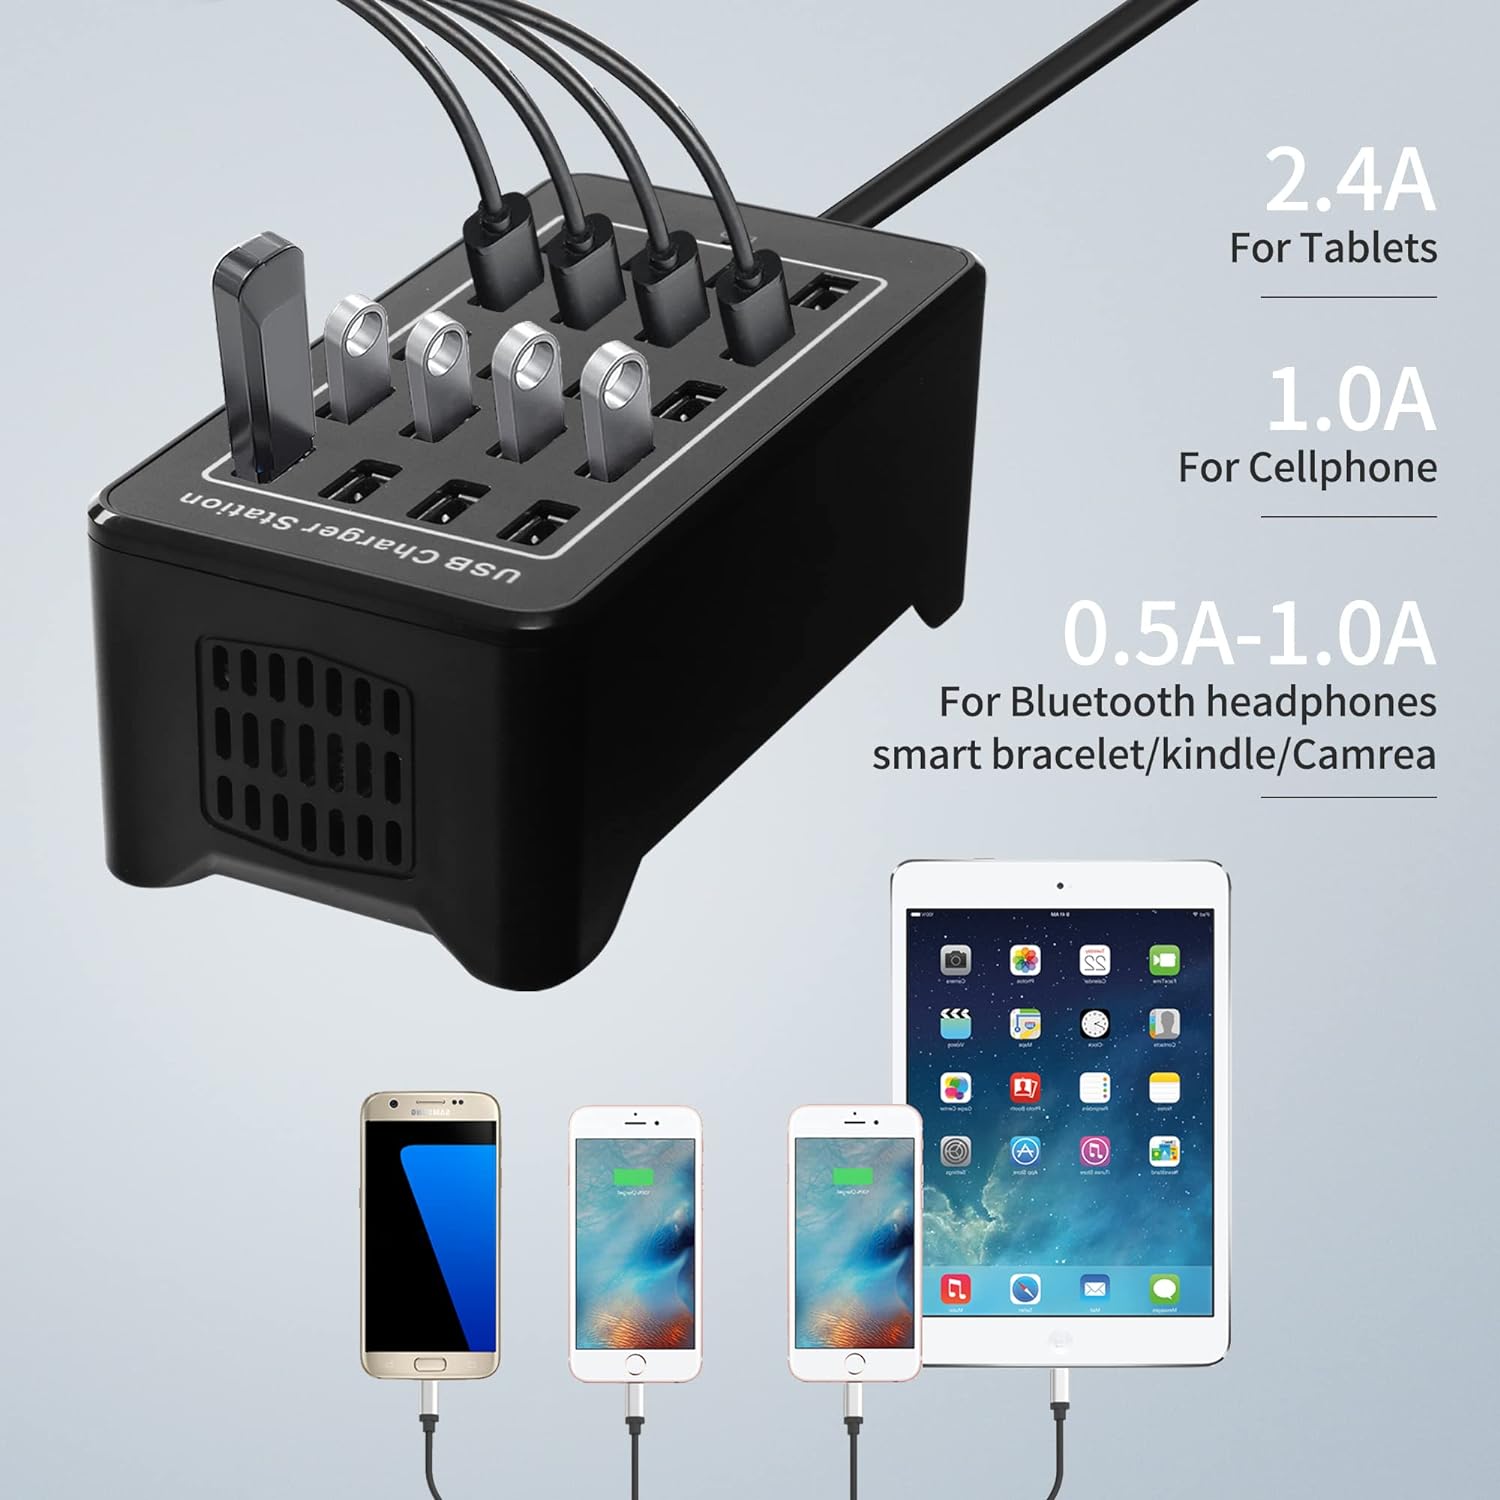 100w 24(20A) Port, USB Fast Charging Station,Travel Desktop USB Rapid Charger,Multi Ports Charging Station Organizer Compatible with Smartphones,Tables,and More Devices